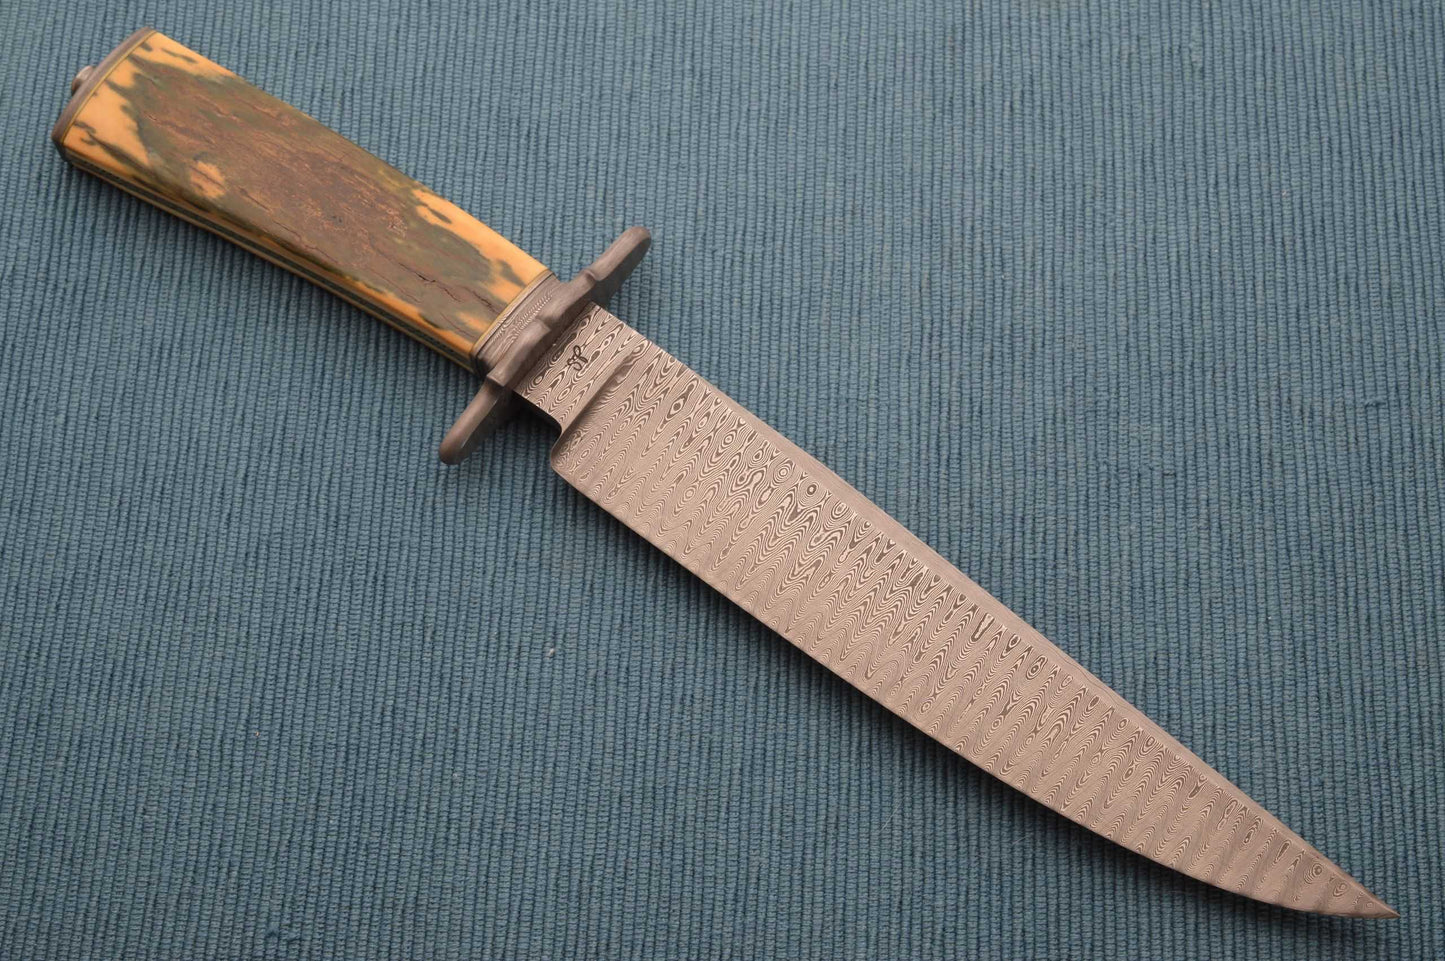 John White Damascus "Mastersmith Test Fighter", Fossil Mammoth Scales